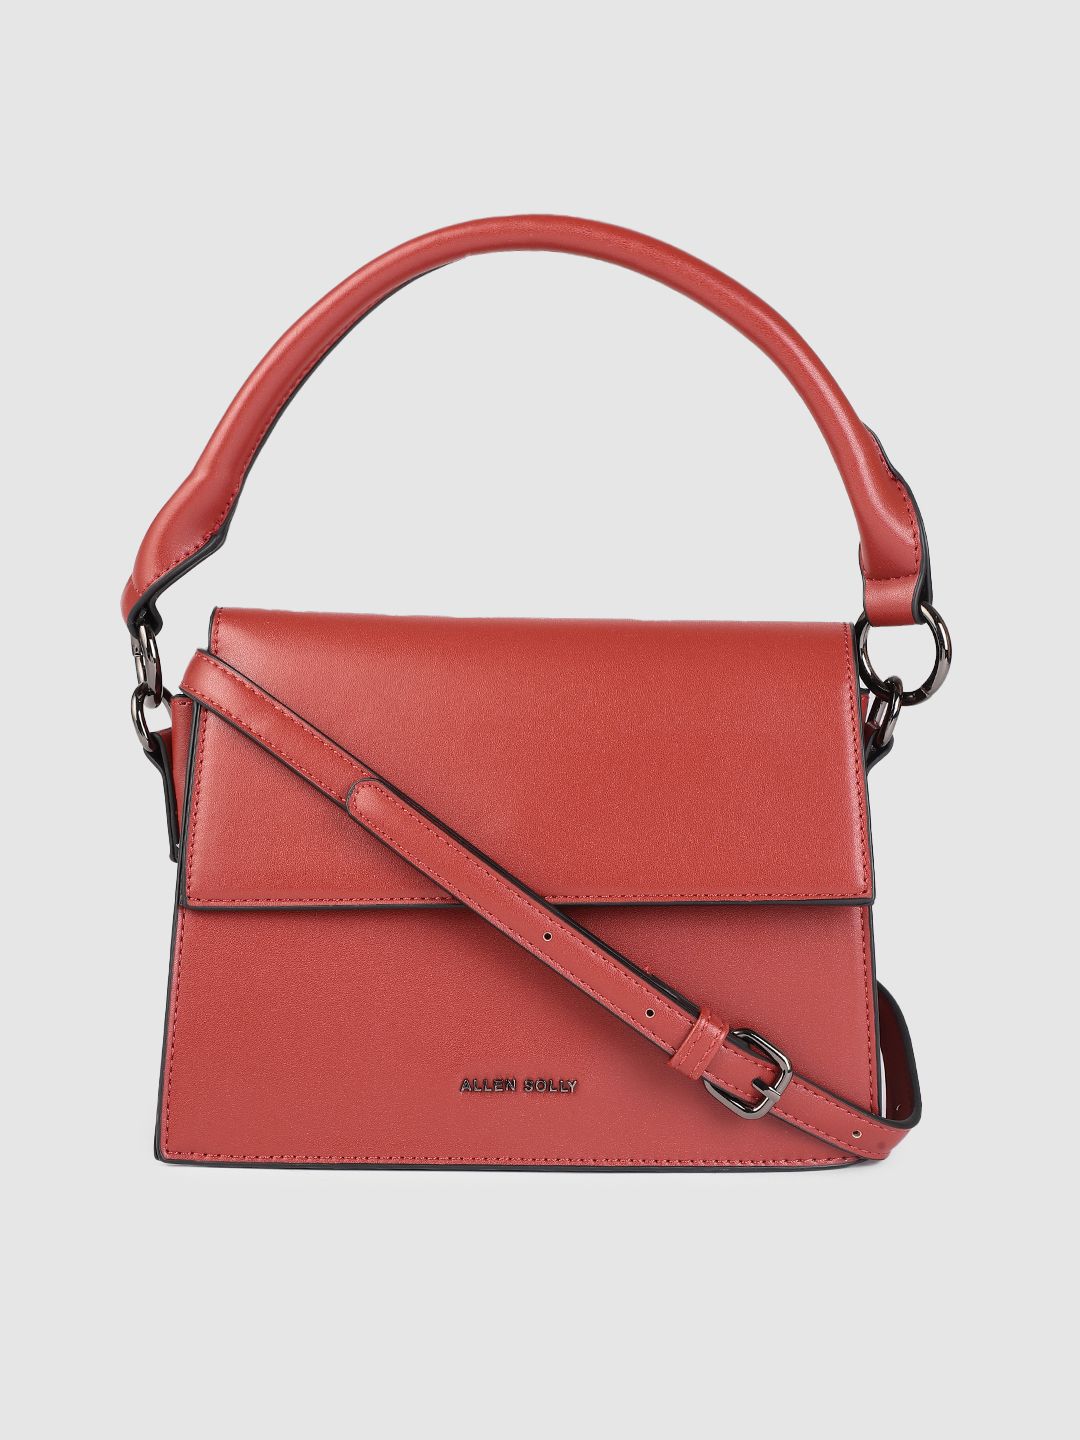 Allen Solly Red Solid PU Regular Structured Handheld Bag Price in India